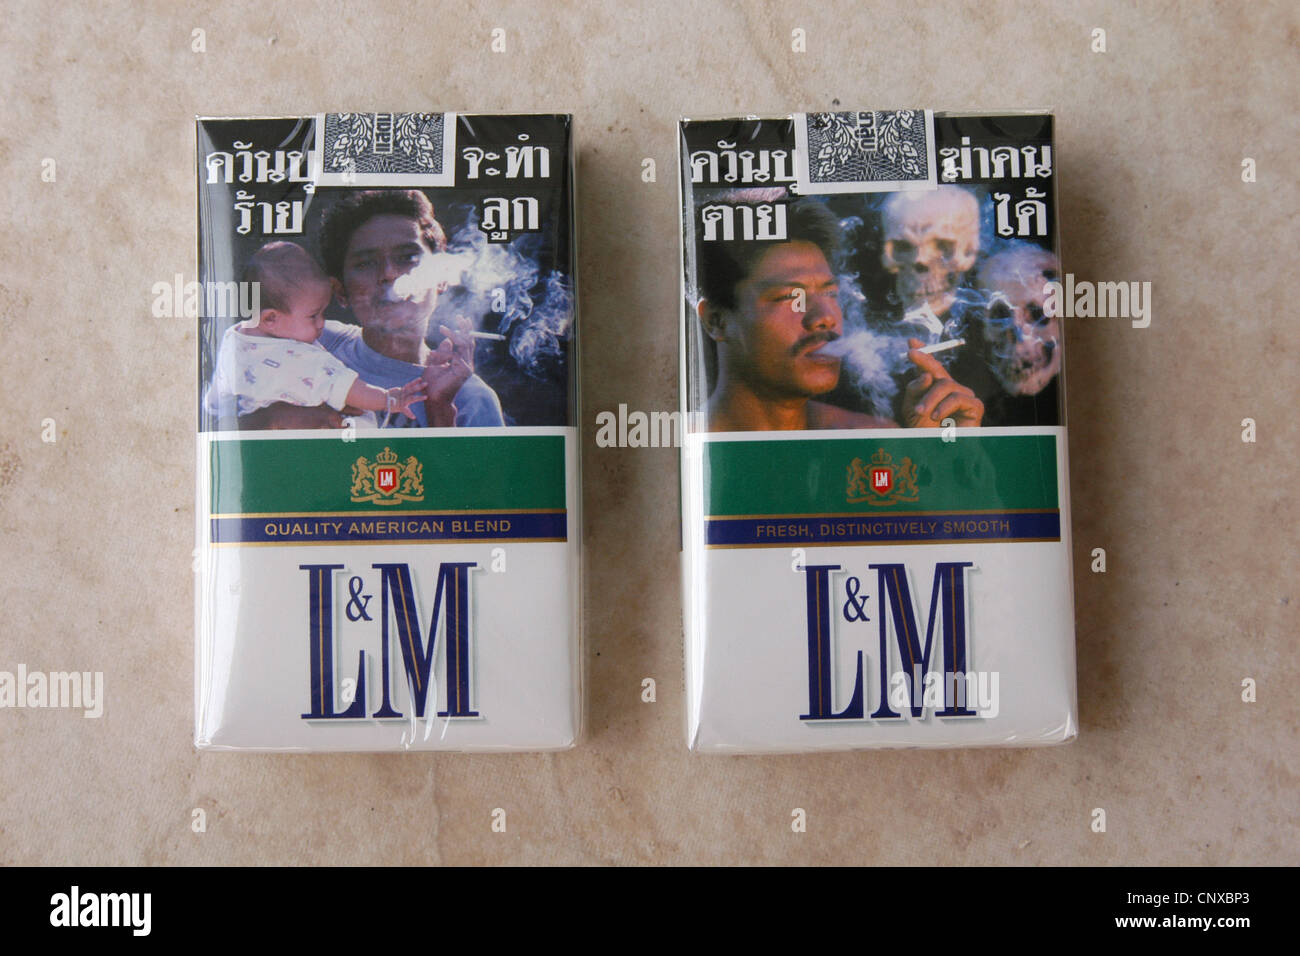 Smoking warning on cigarette packs in Thailand. Stock Photo